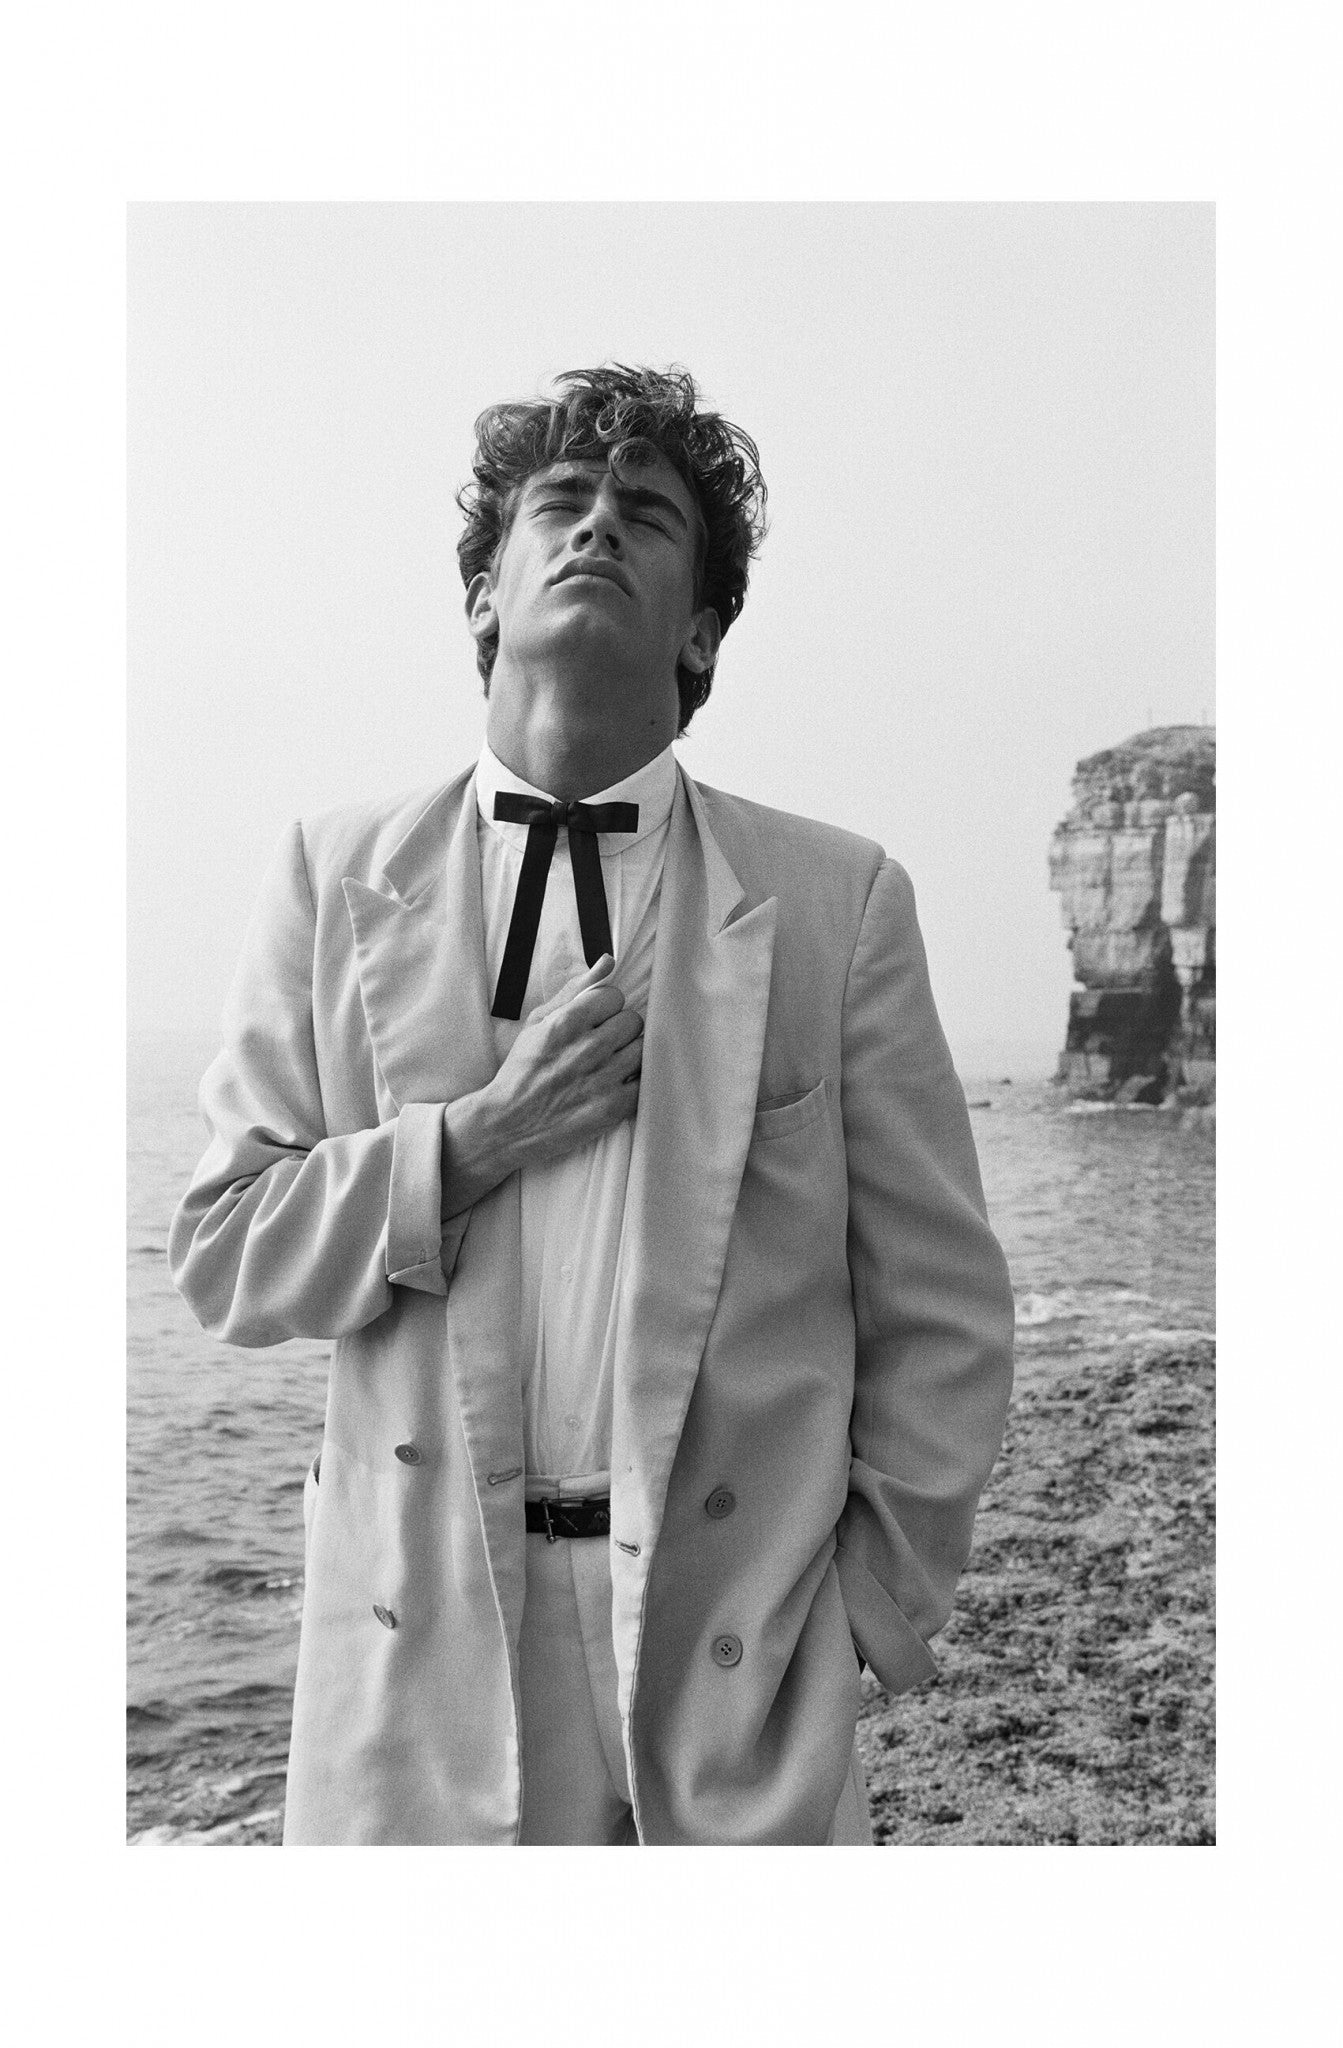 The Pop Group - Mark Stewart in a White Suit, England, 1978 Print (3/7)